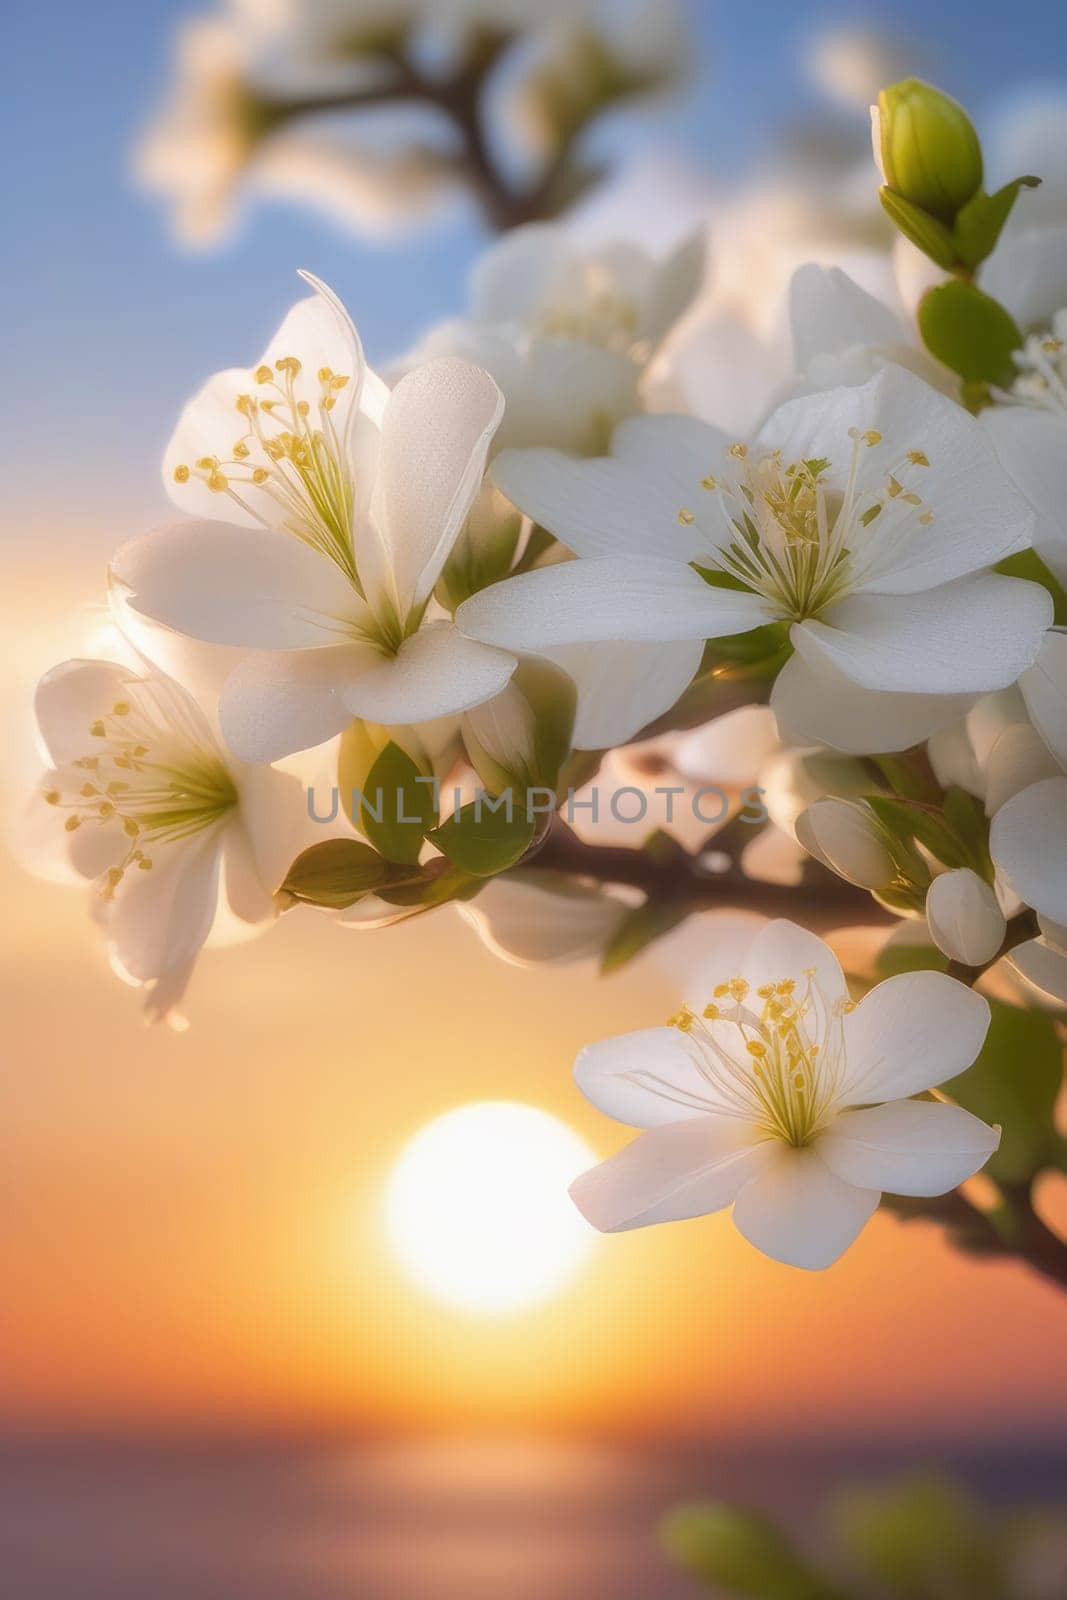 Branches with fresh white flowers in full bloom against the sunset sky